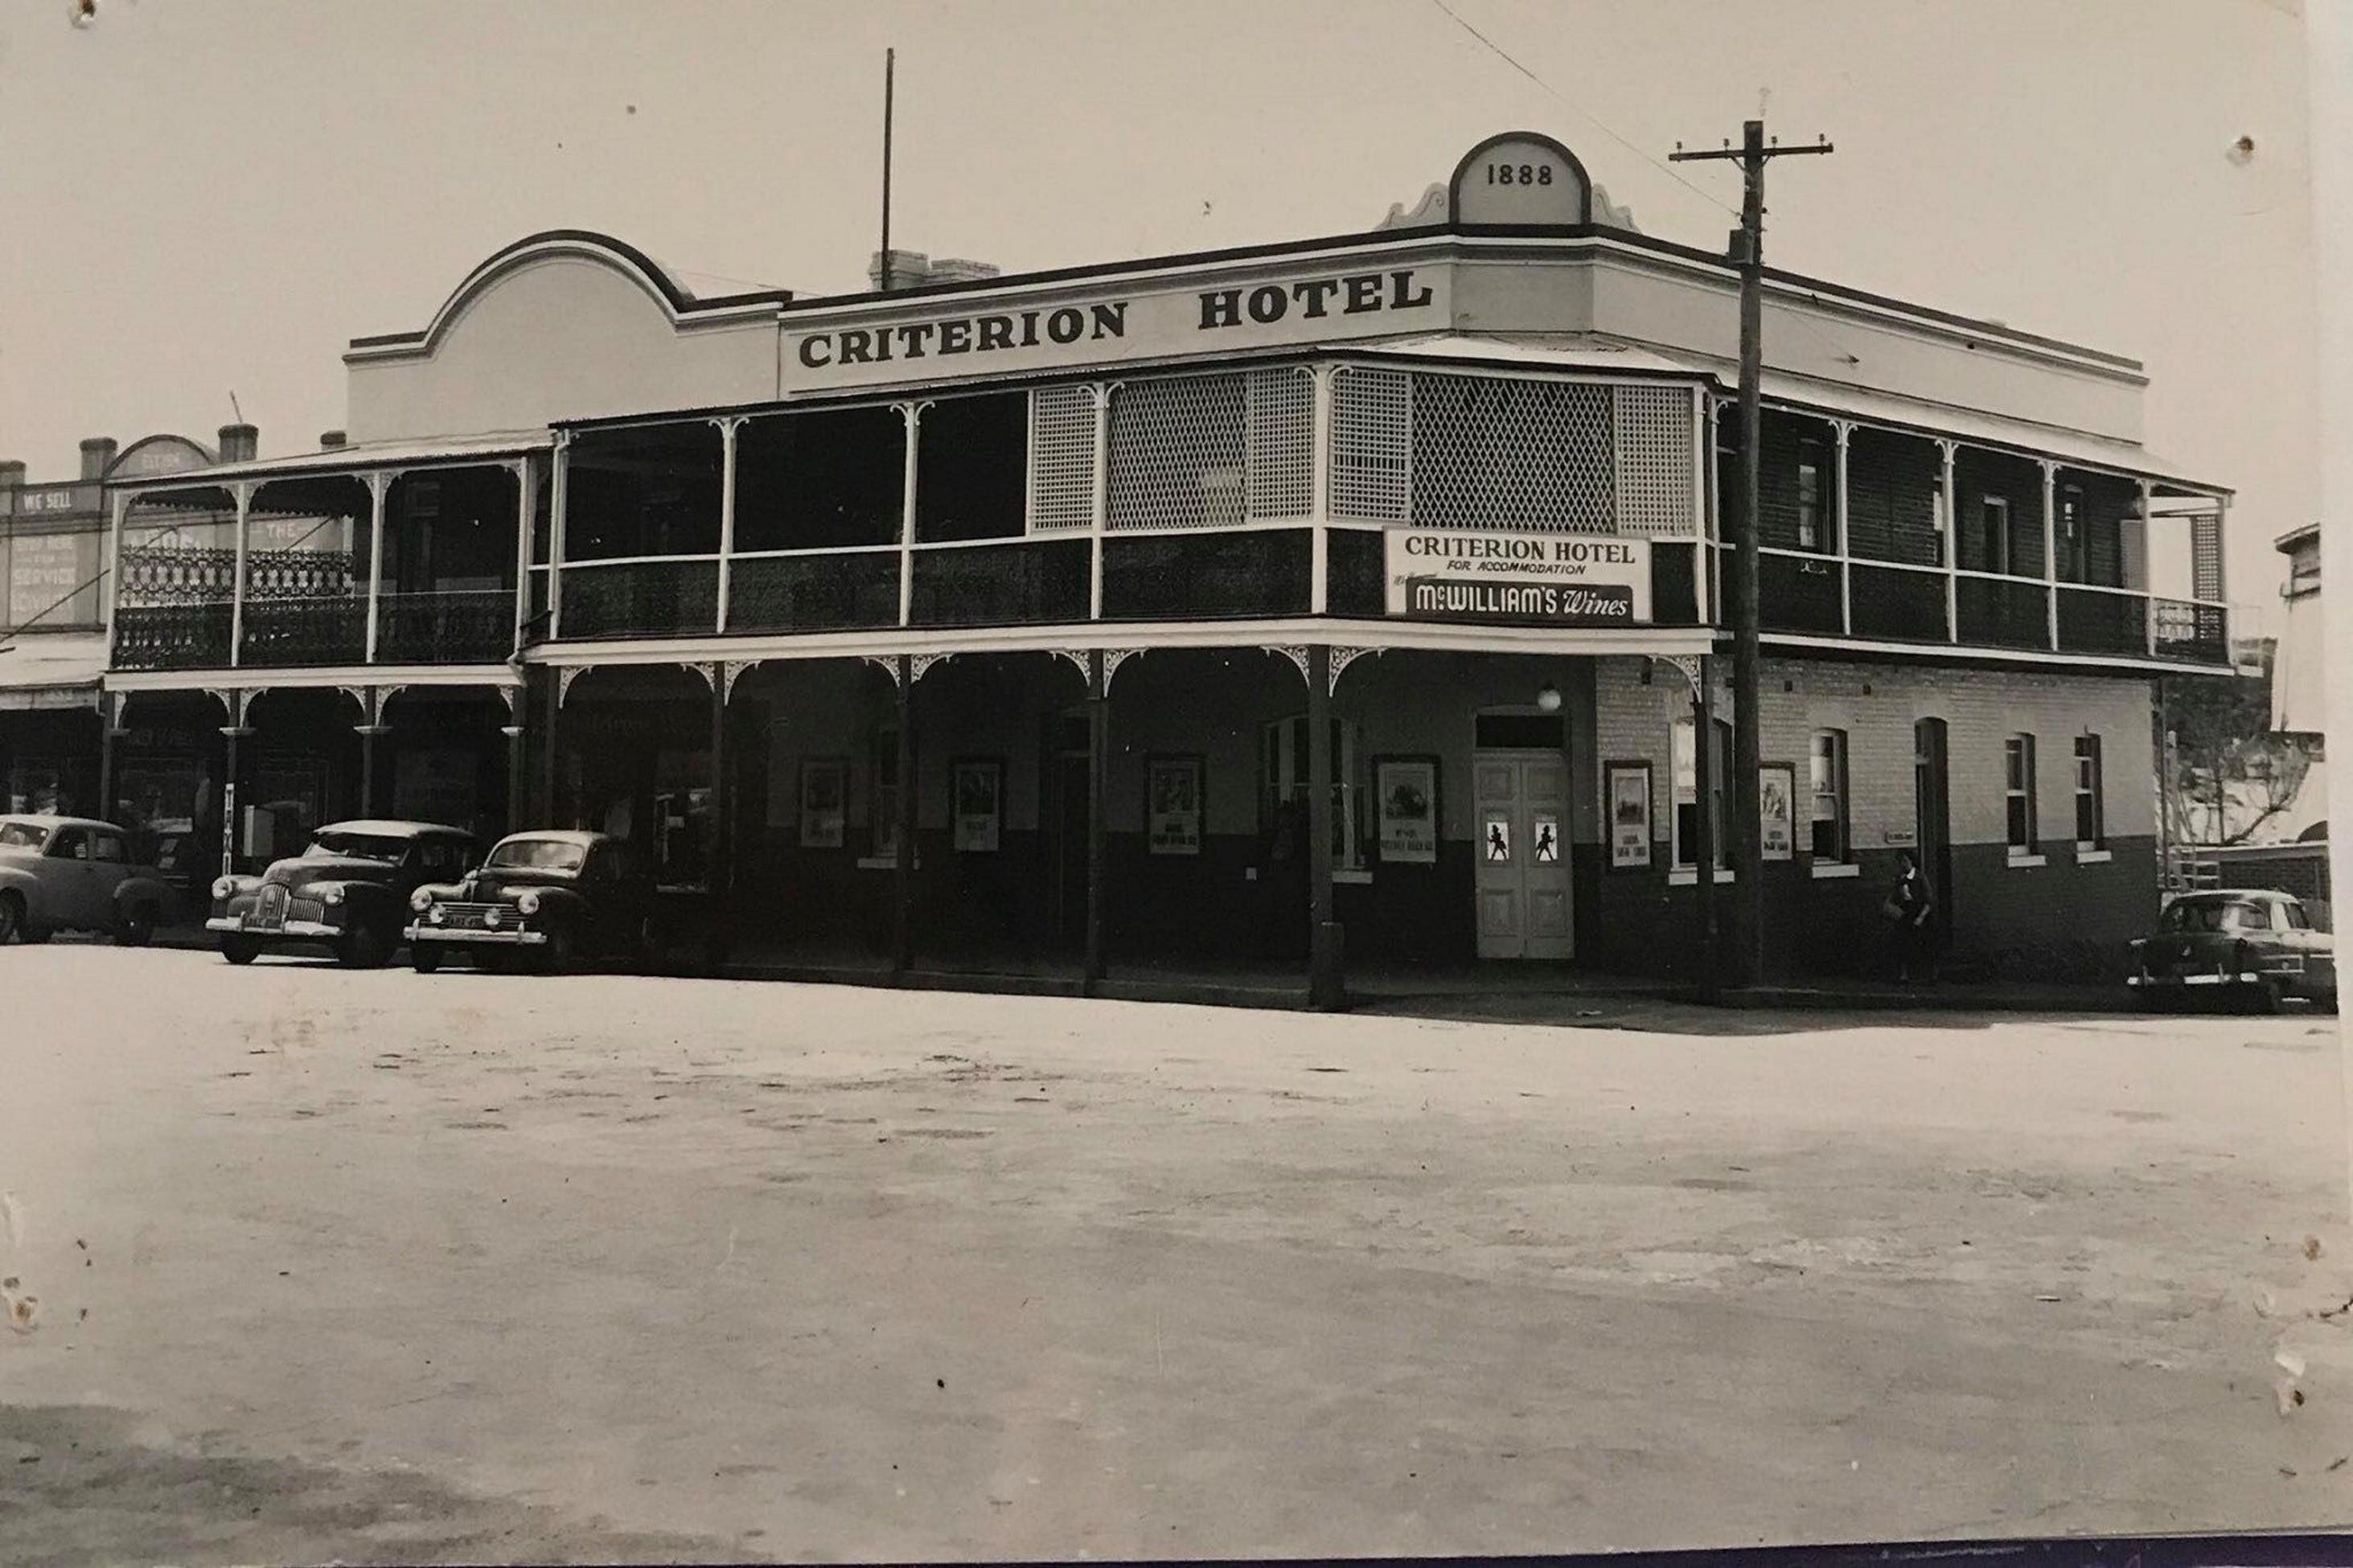 Criterion Hotel Grenfell - Surfers Gold Coast